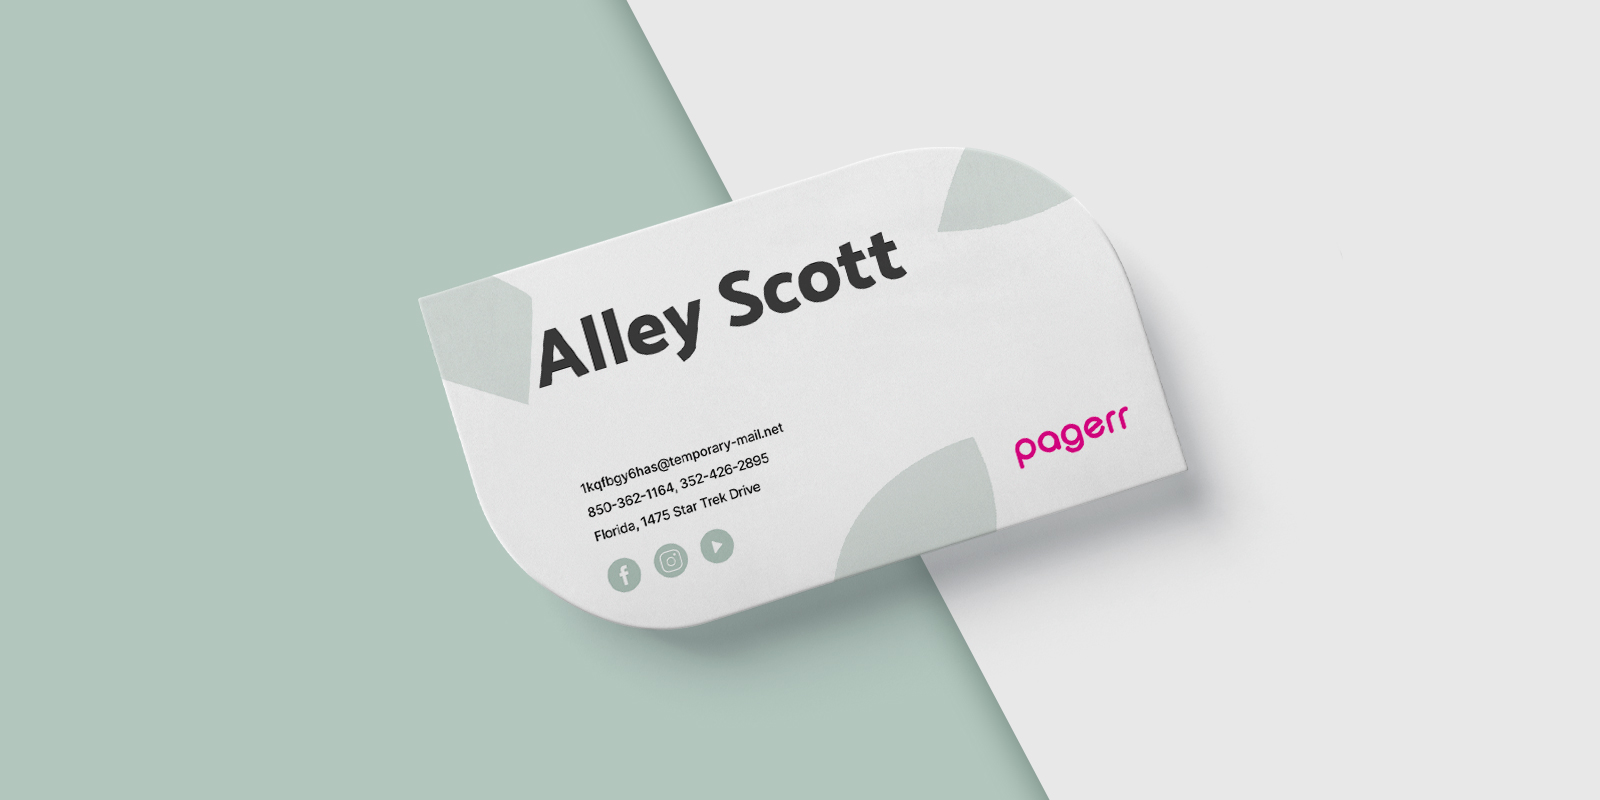 Special shape business cards in Brisbane - Print with Pagerr